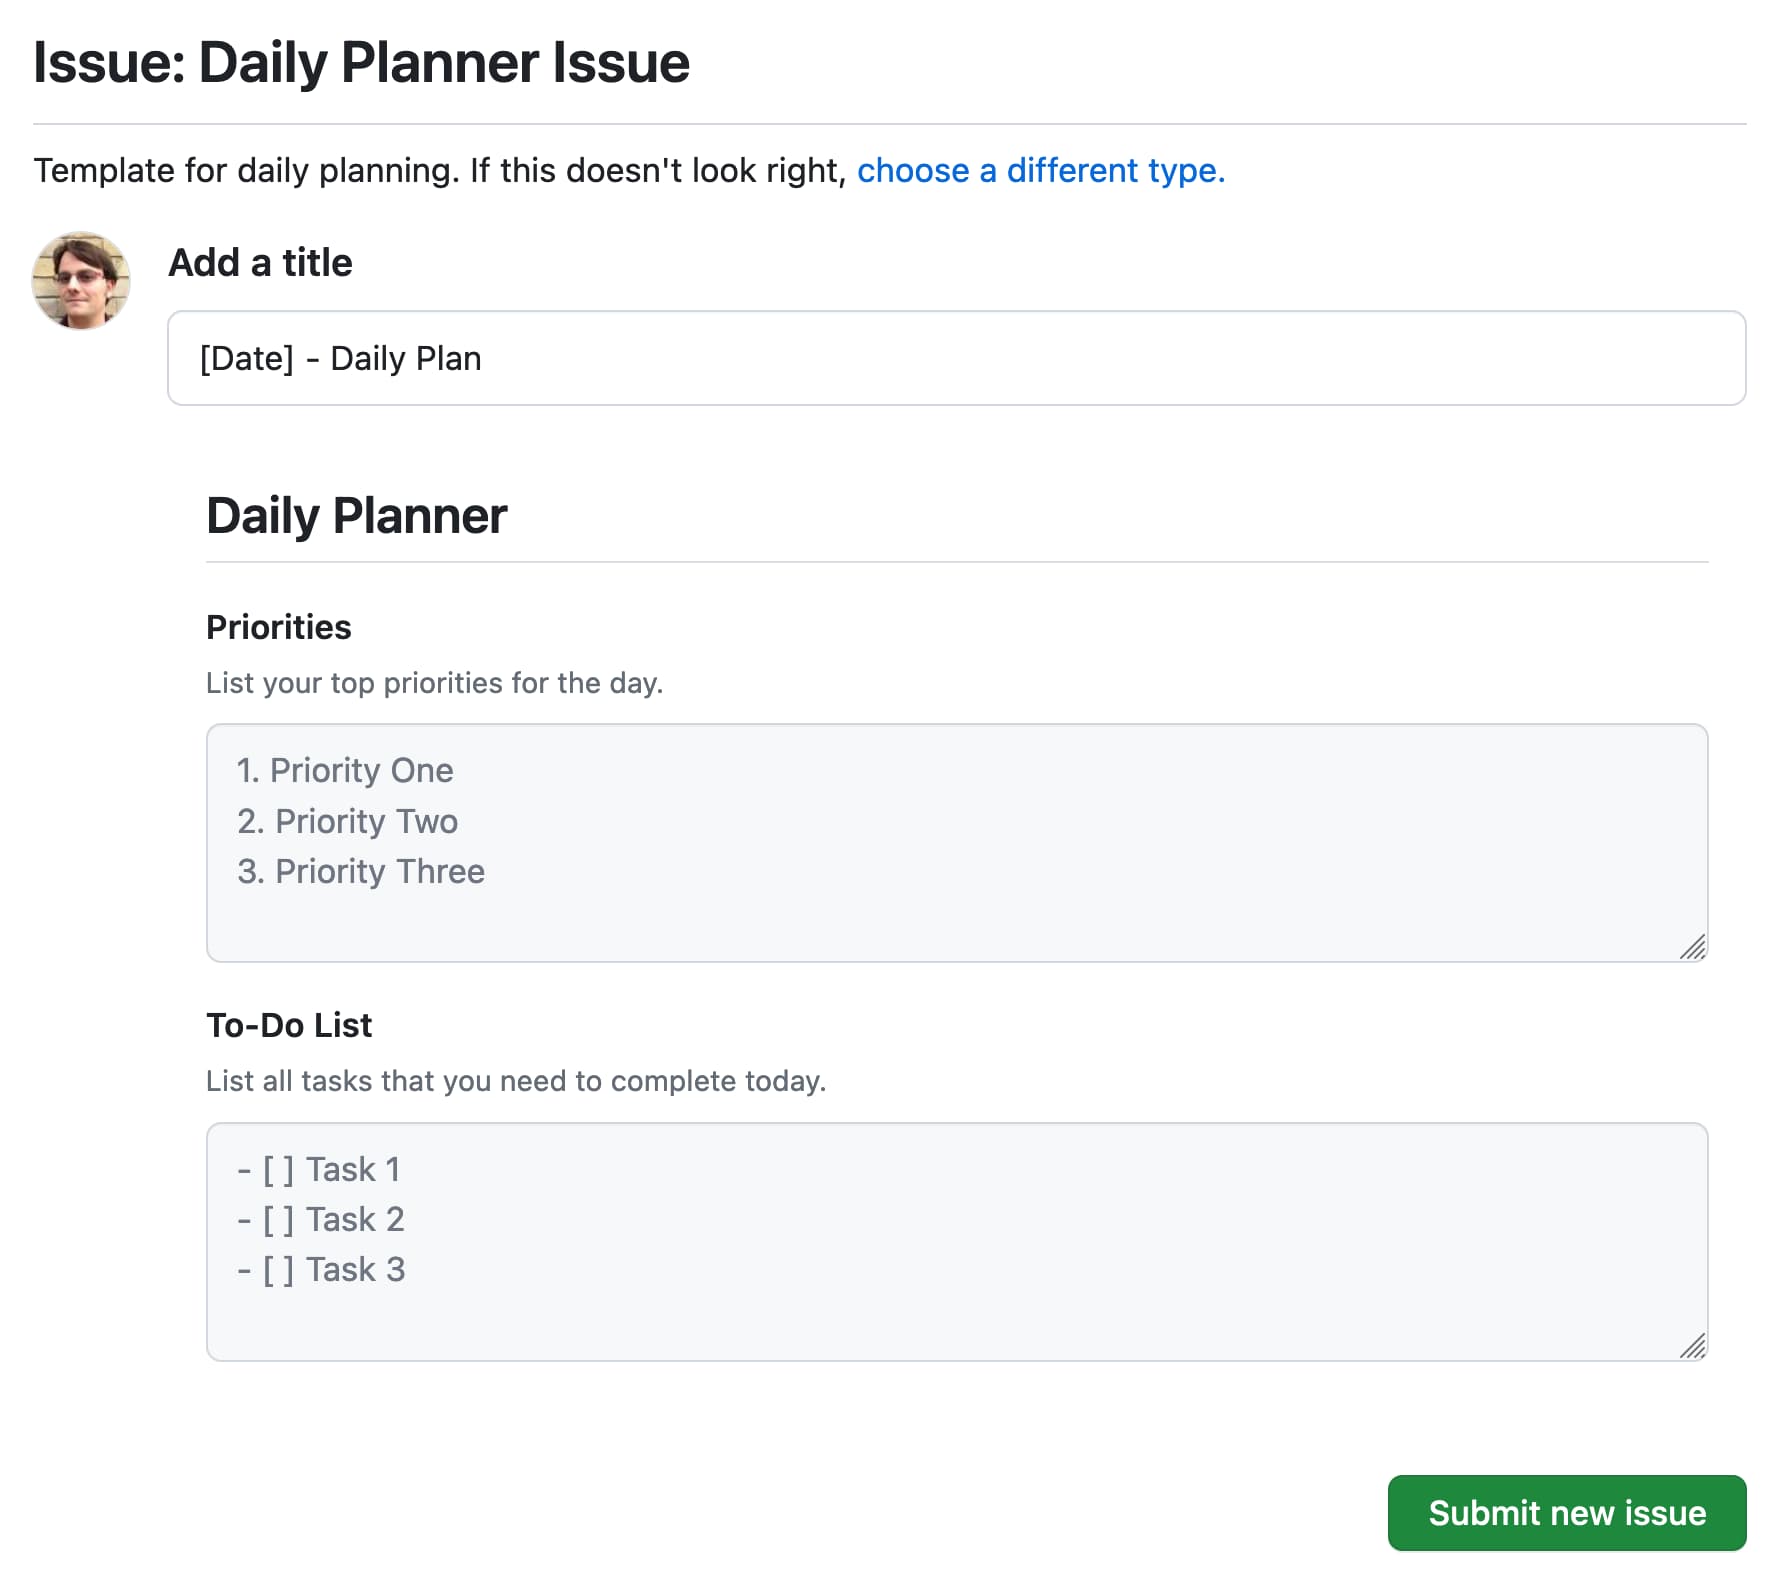 Issue: Daily Planner issue. Has a title pre-populated to [Date] - Daily Plan, then a Priorities textarea, then a To-Do List textarea. At the bottom is a Submit new issue button.